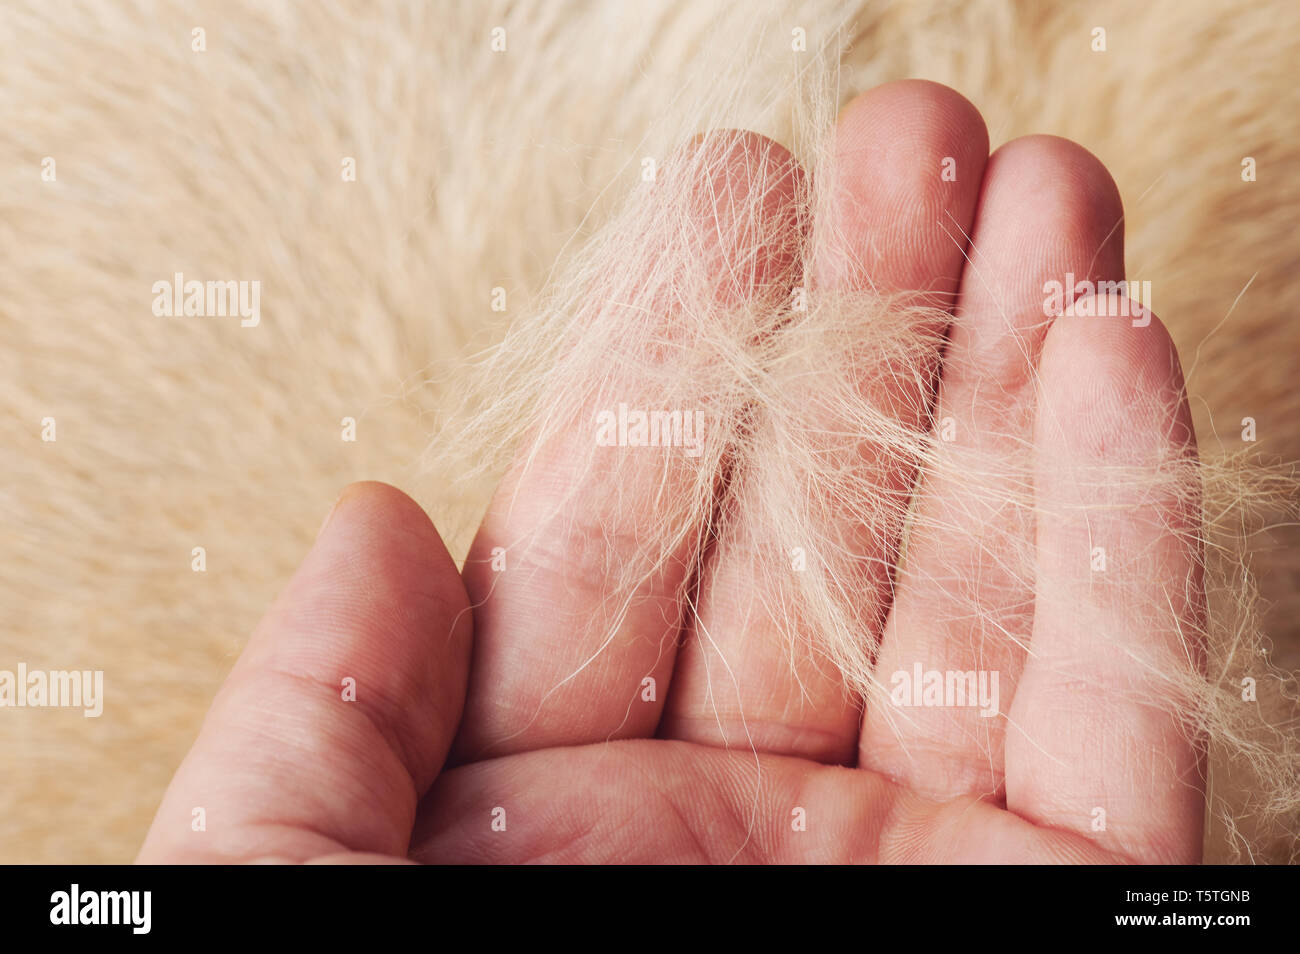 Brown dog fur in human palm close up view Stock Photo